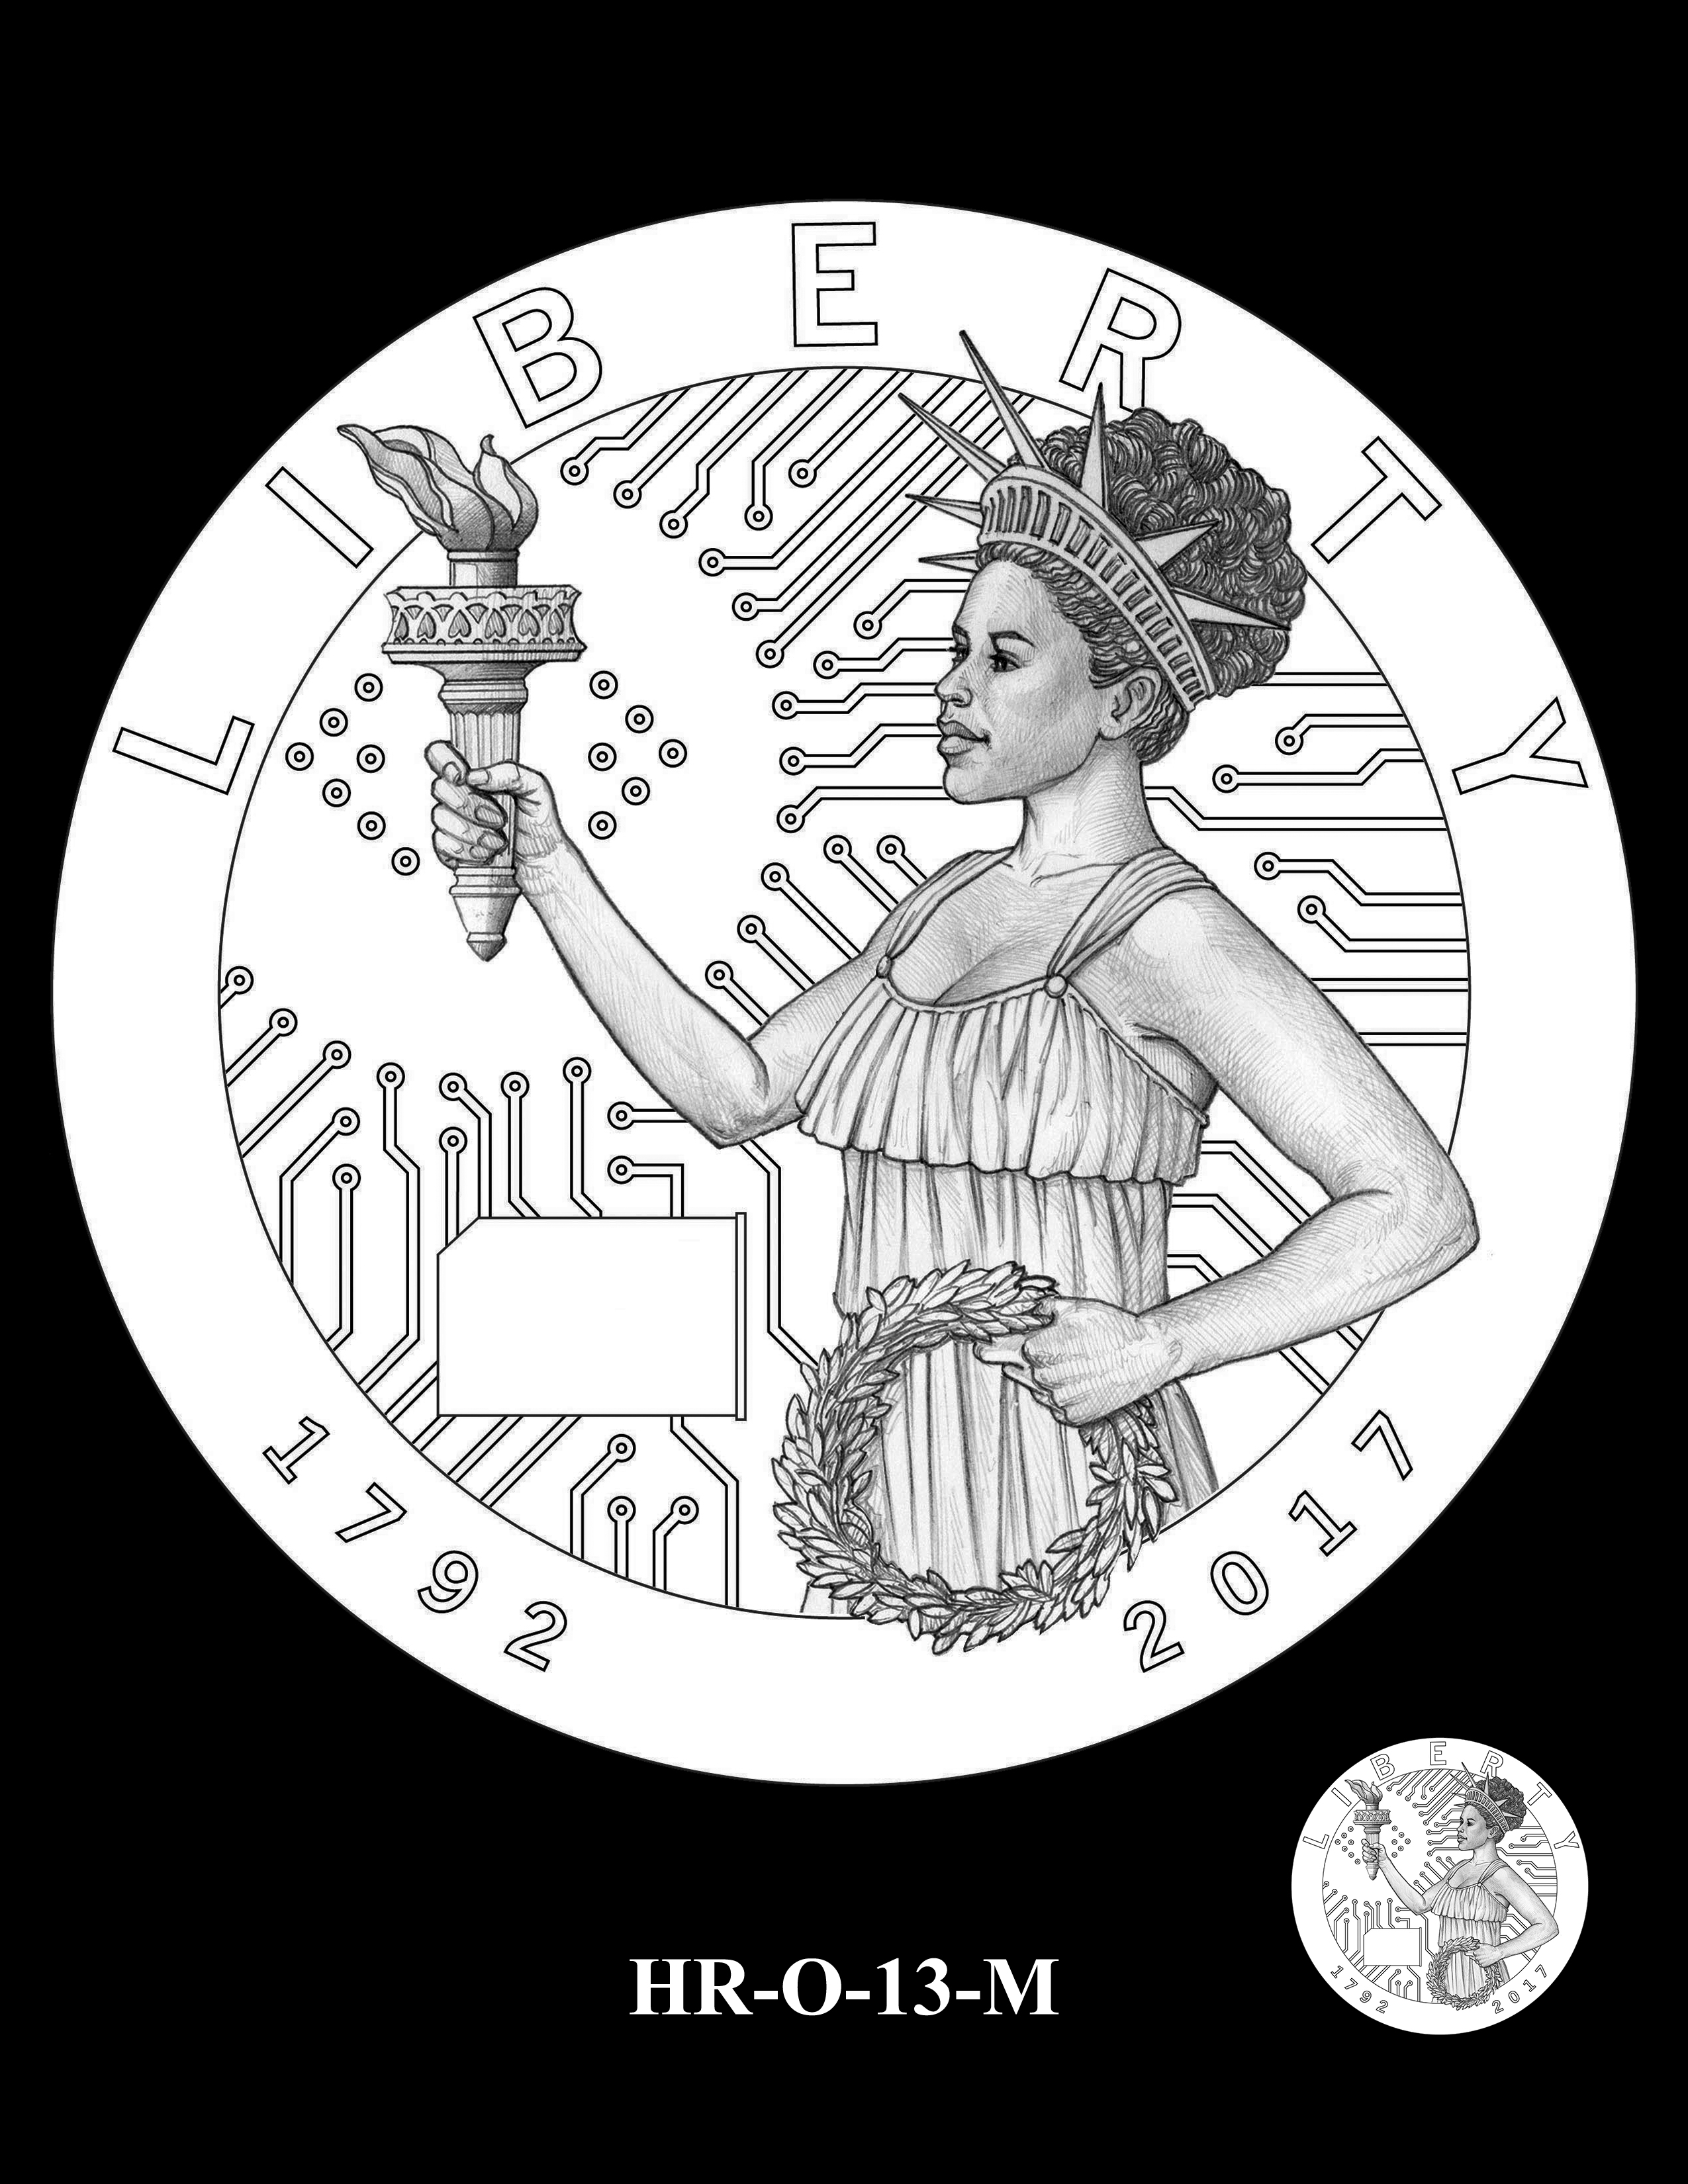 HR-O-13-M - 2017 American Liberty High Relief Gold Coin and Silver Medal Program